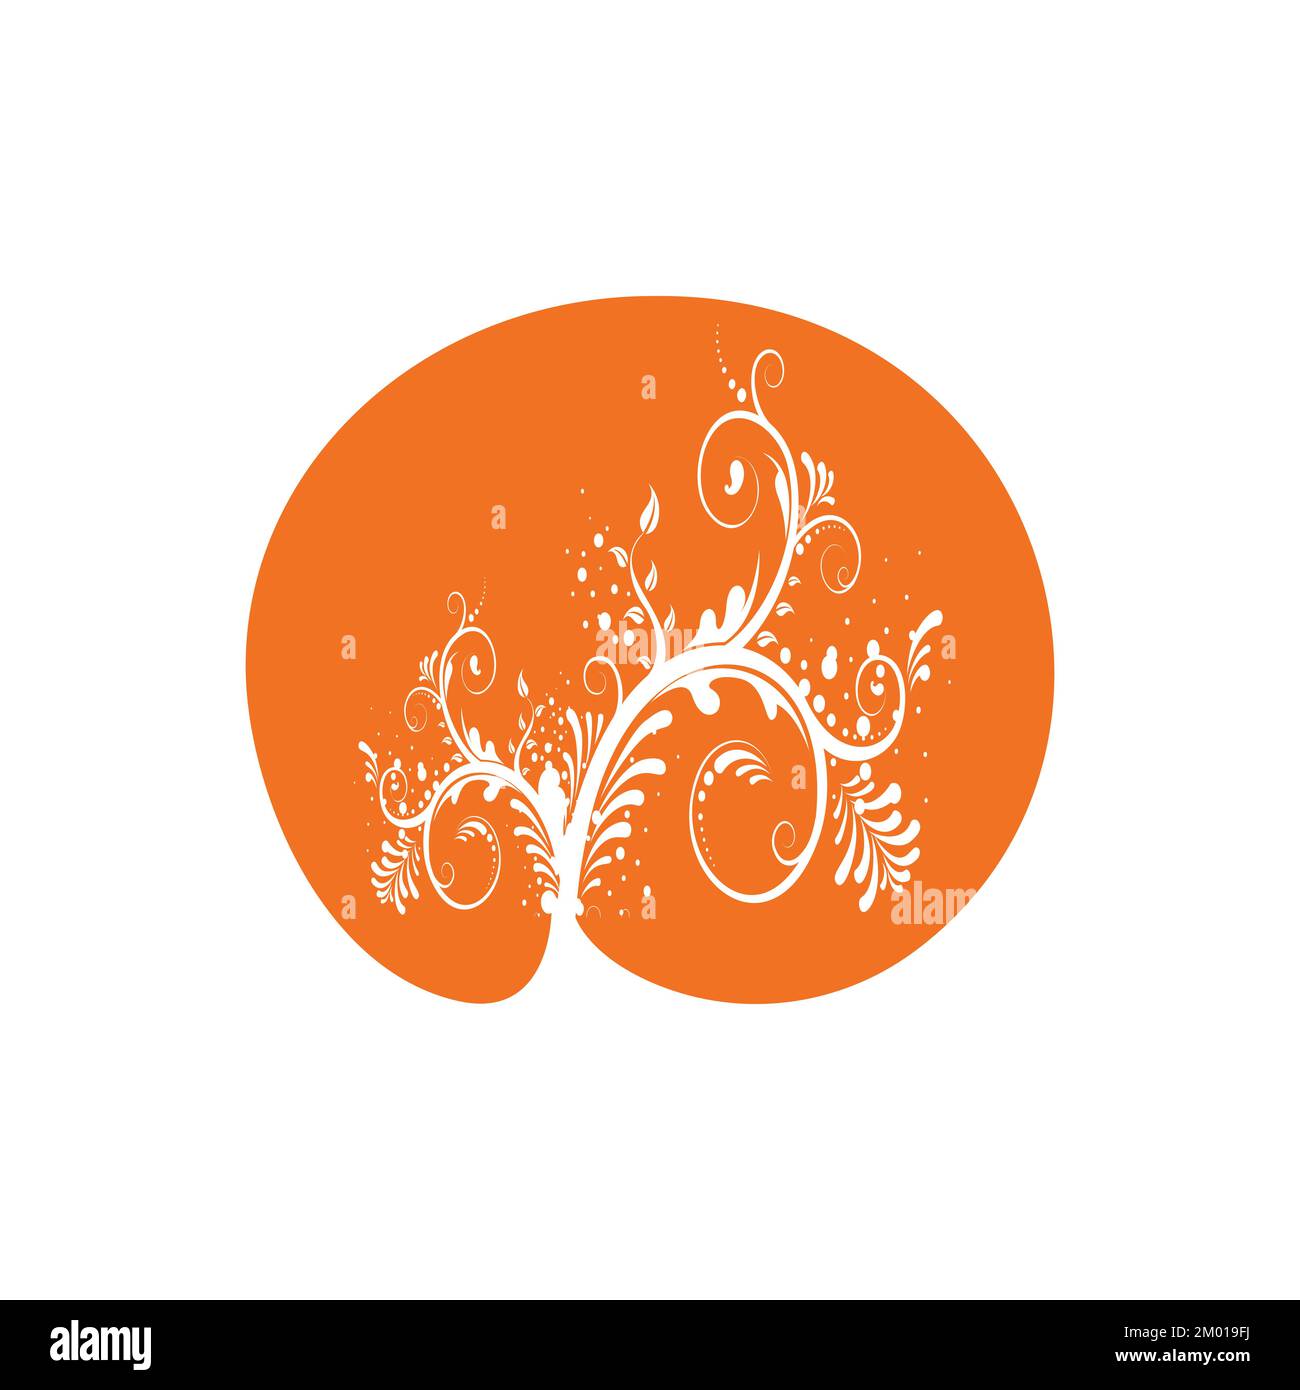 Organic nature tree vector template with orange round Stock Vector